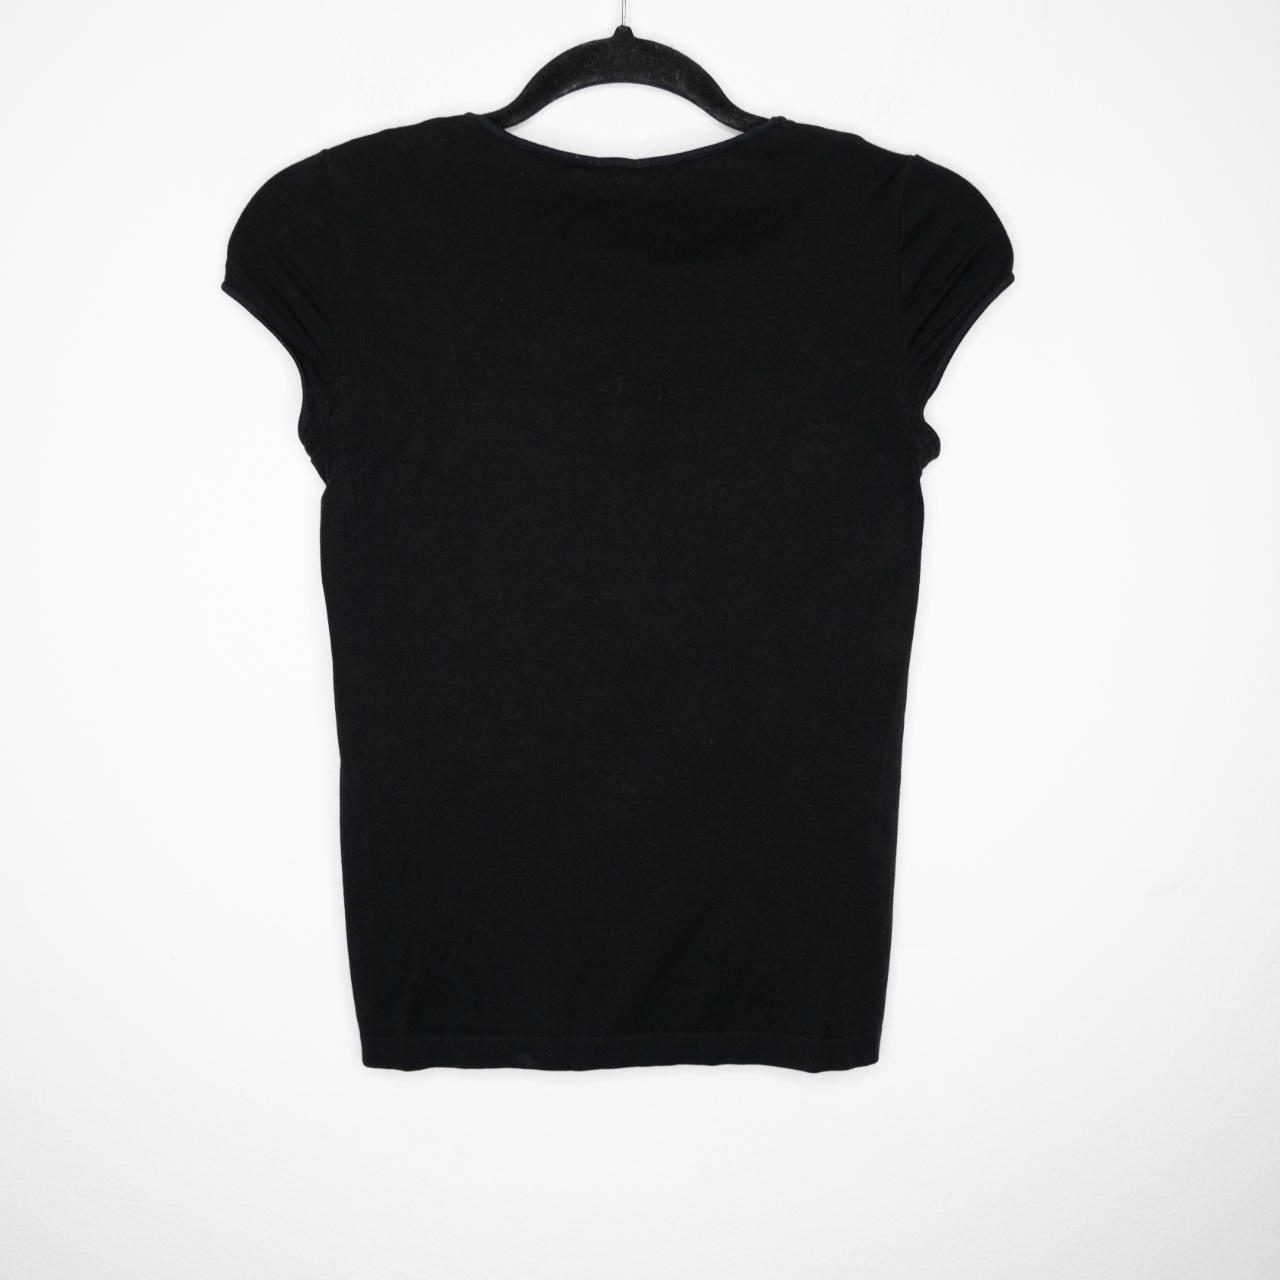 Product Image 2 - Honolulu top from Wolford in